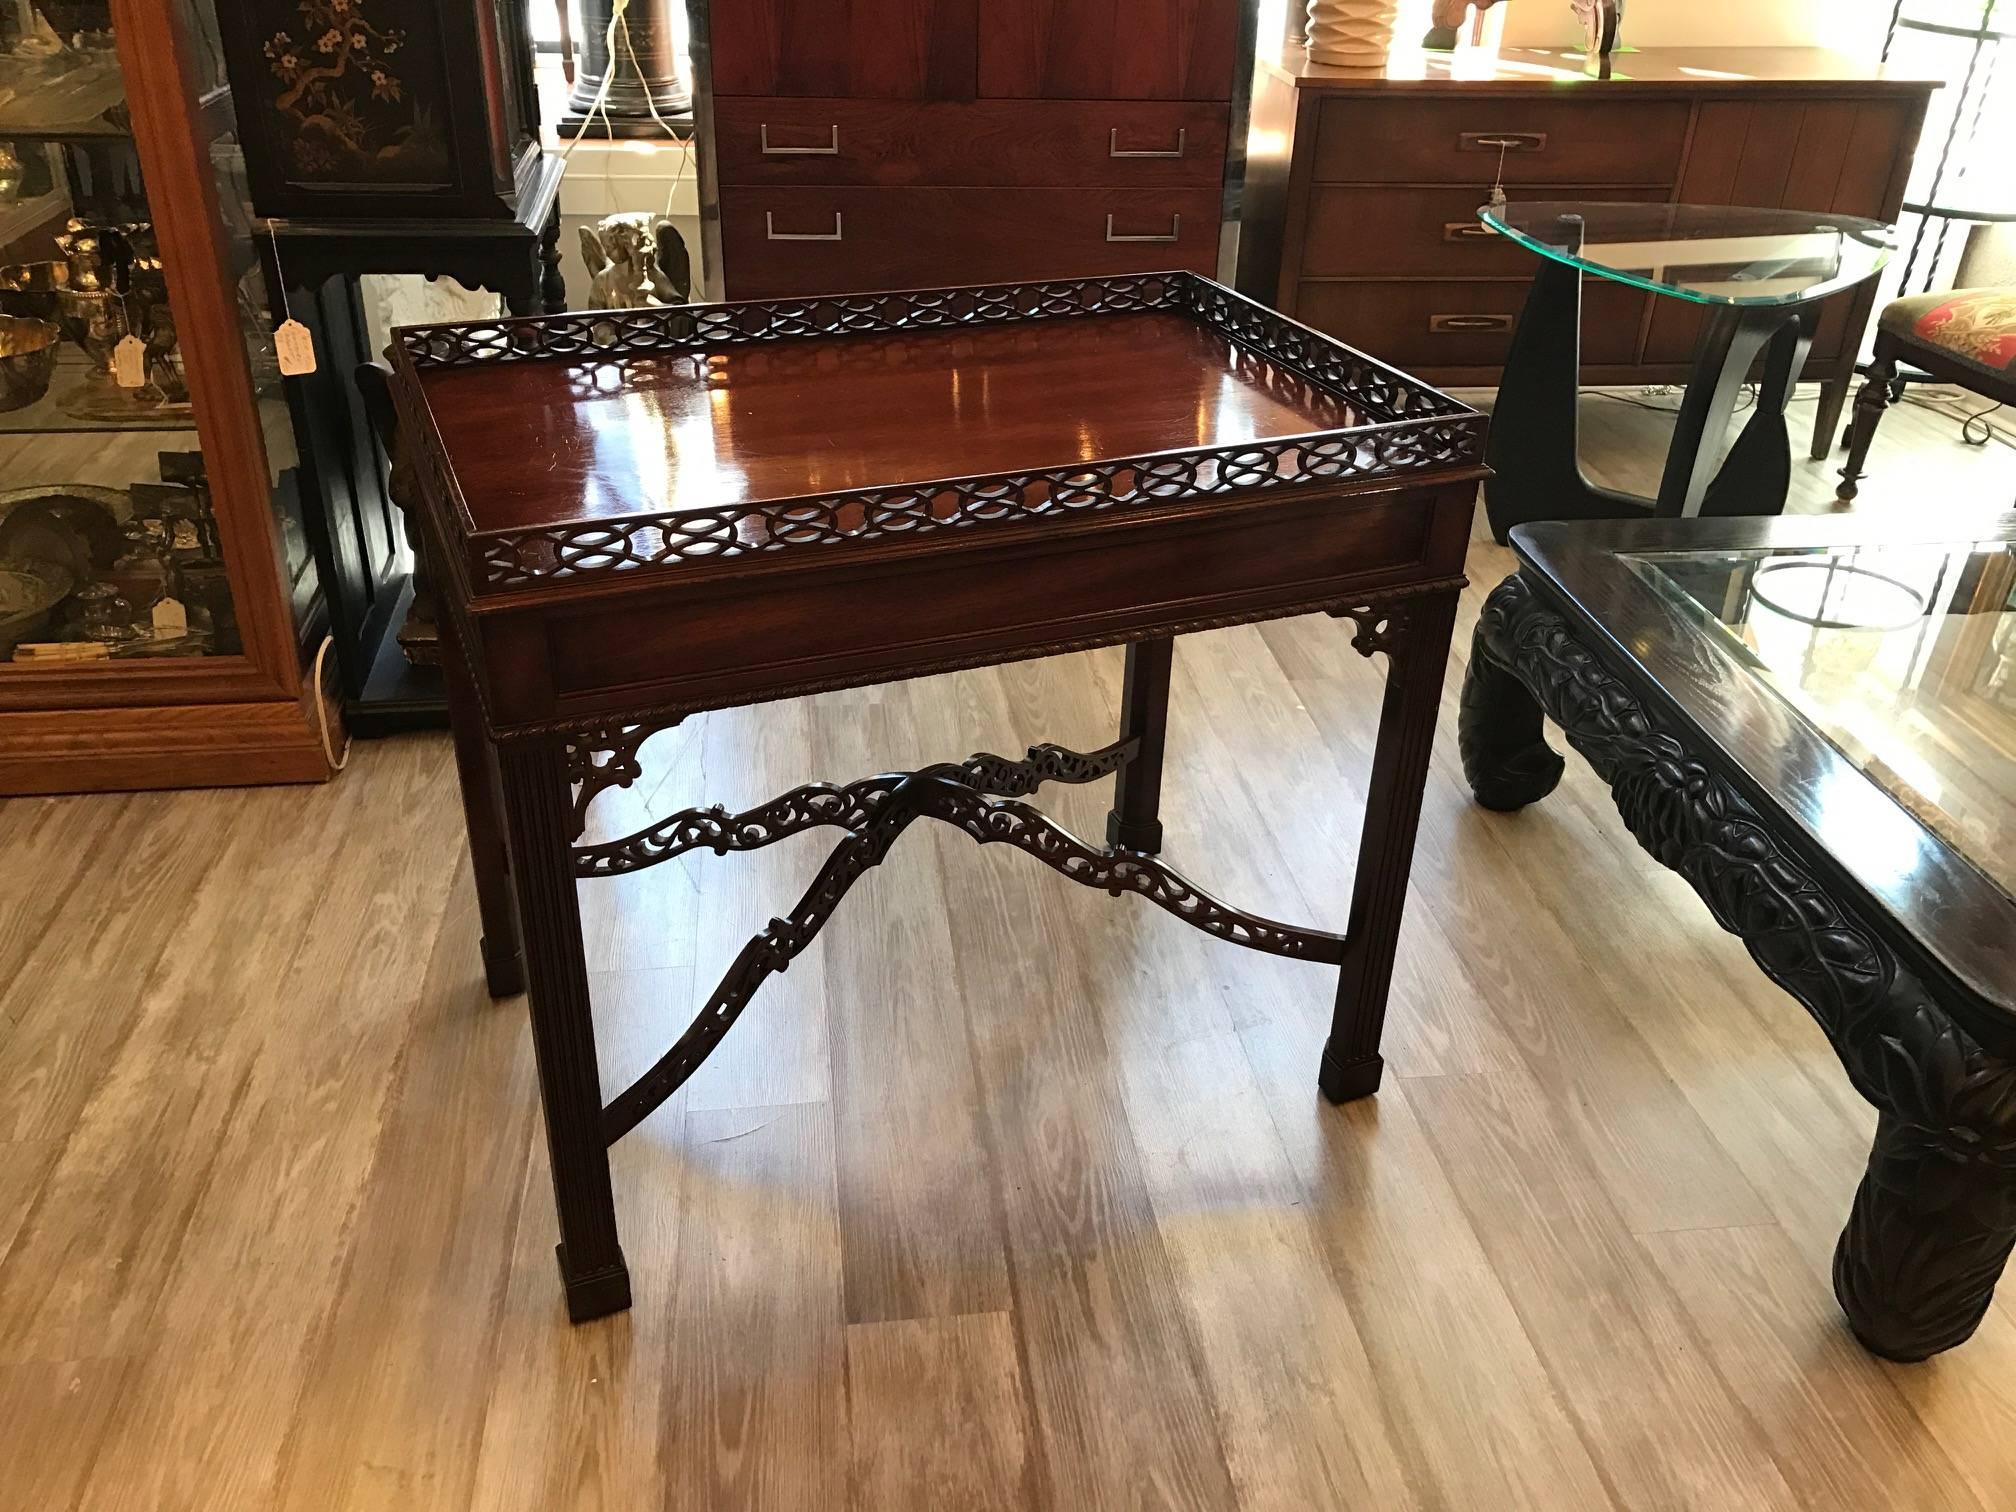 Chippendale tea table, with its Asian inspired design and ornamentation, is made of solid mahogany and figured mahogany veneers. The tea table has delicate pierced wood in the fretwork of the gallery and cross stretchers. A molded skirt with applied